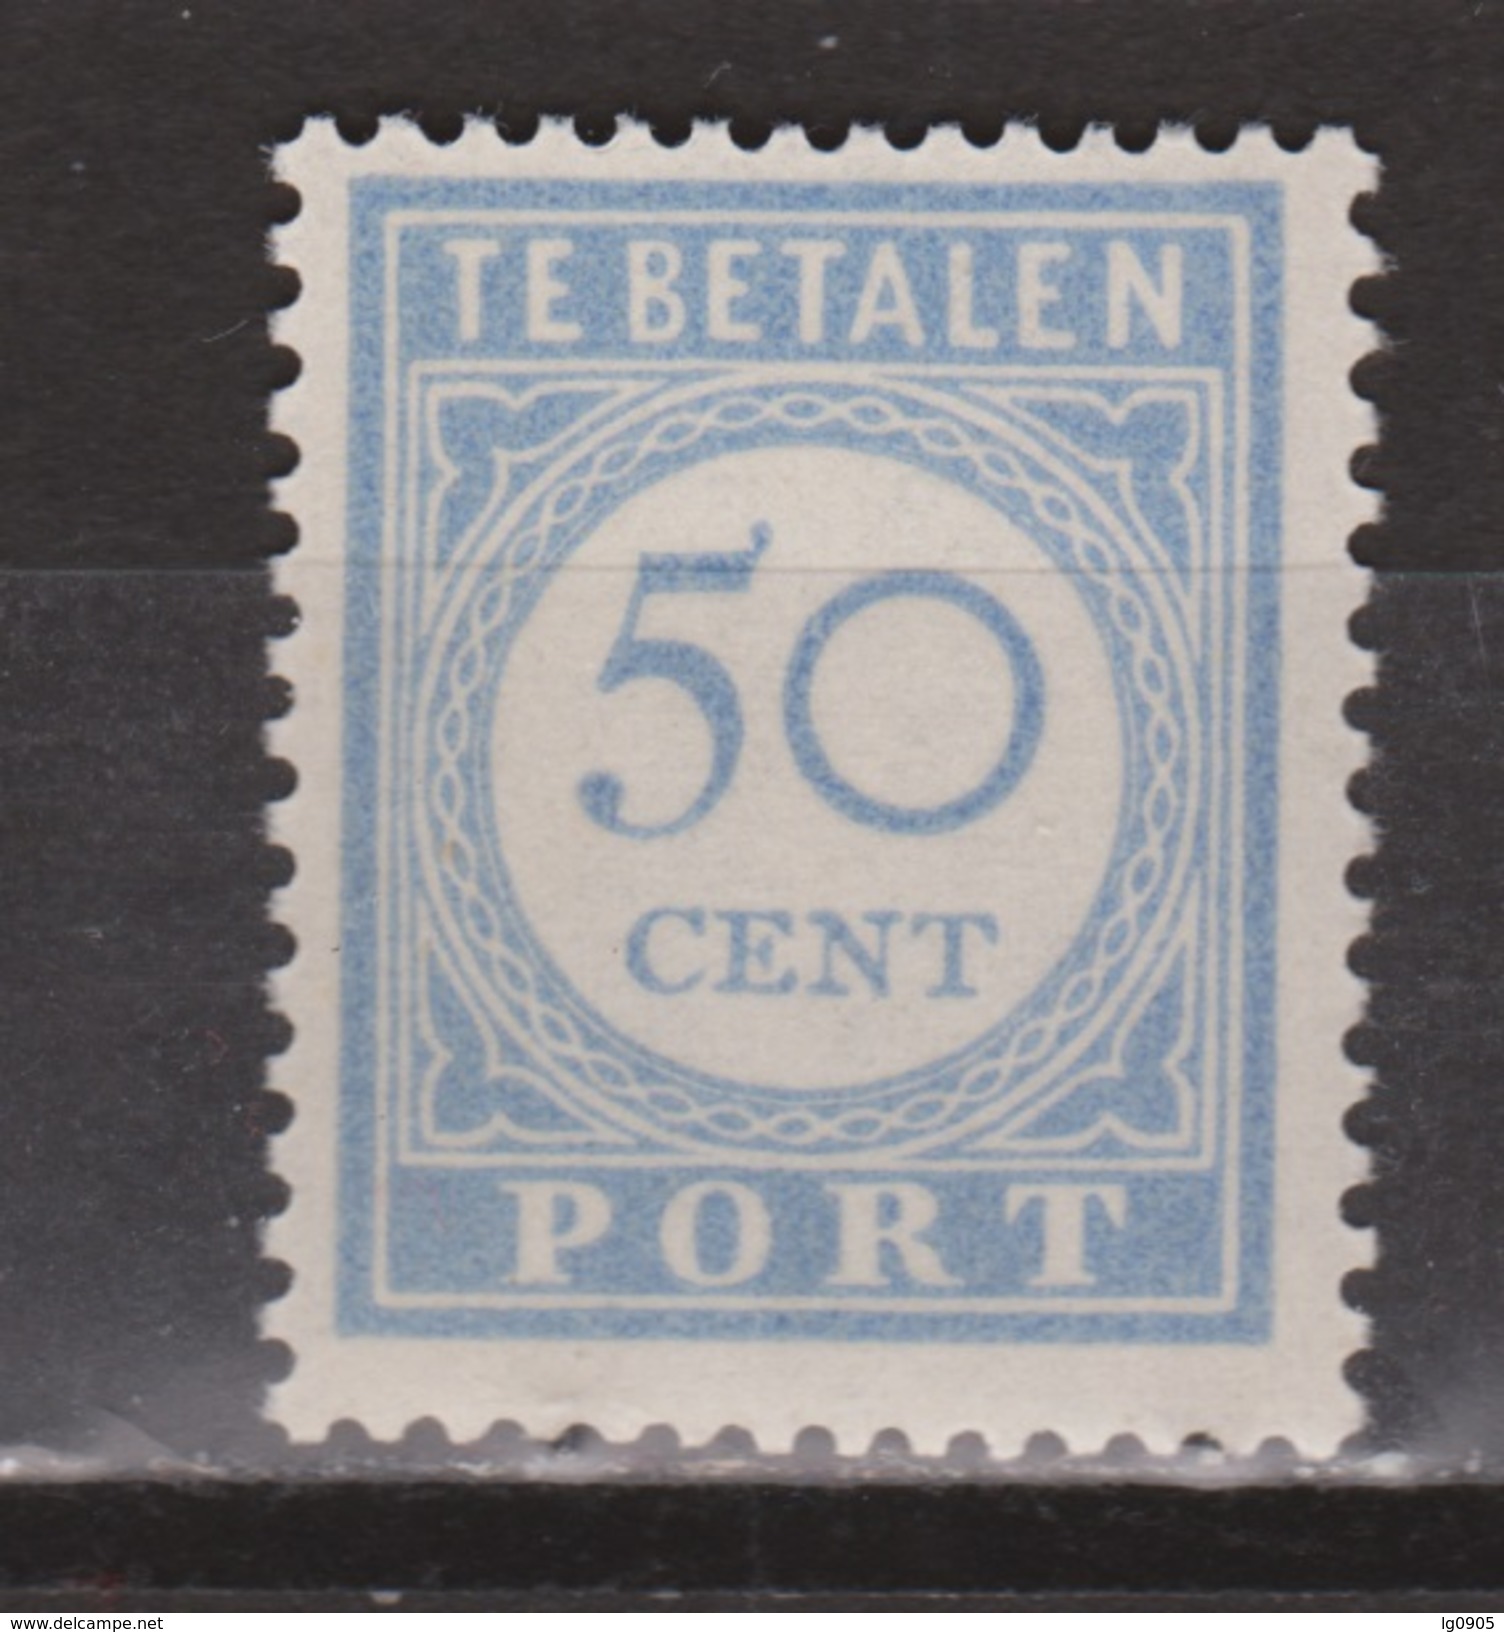 NVPH Nederland Netherlands Holanda Pays Bas Port 60 MLH Timbre-taxe Postmarke Sellos De Correos NOW MANY DUE STAMPS - Postage Due